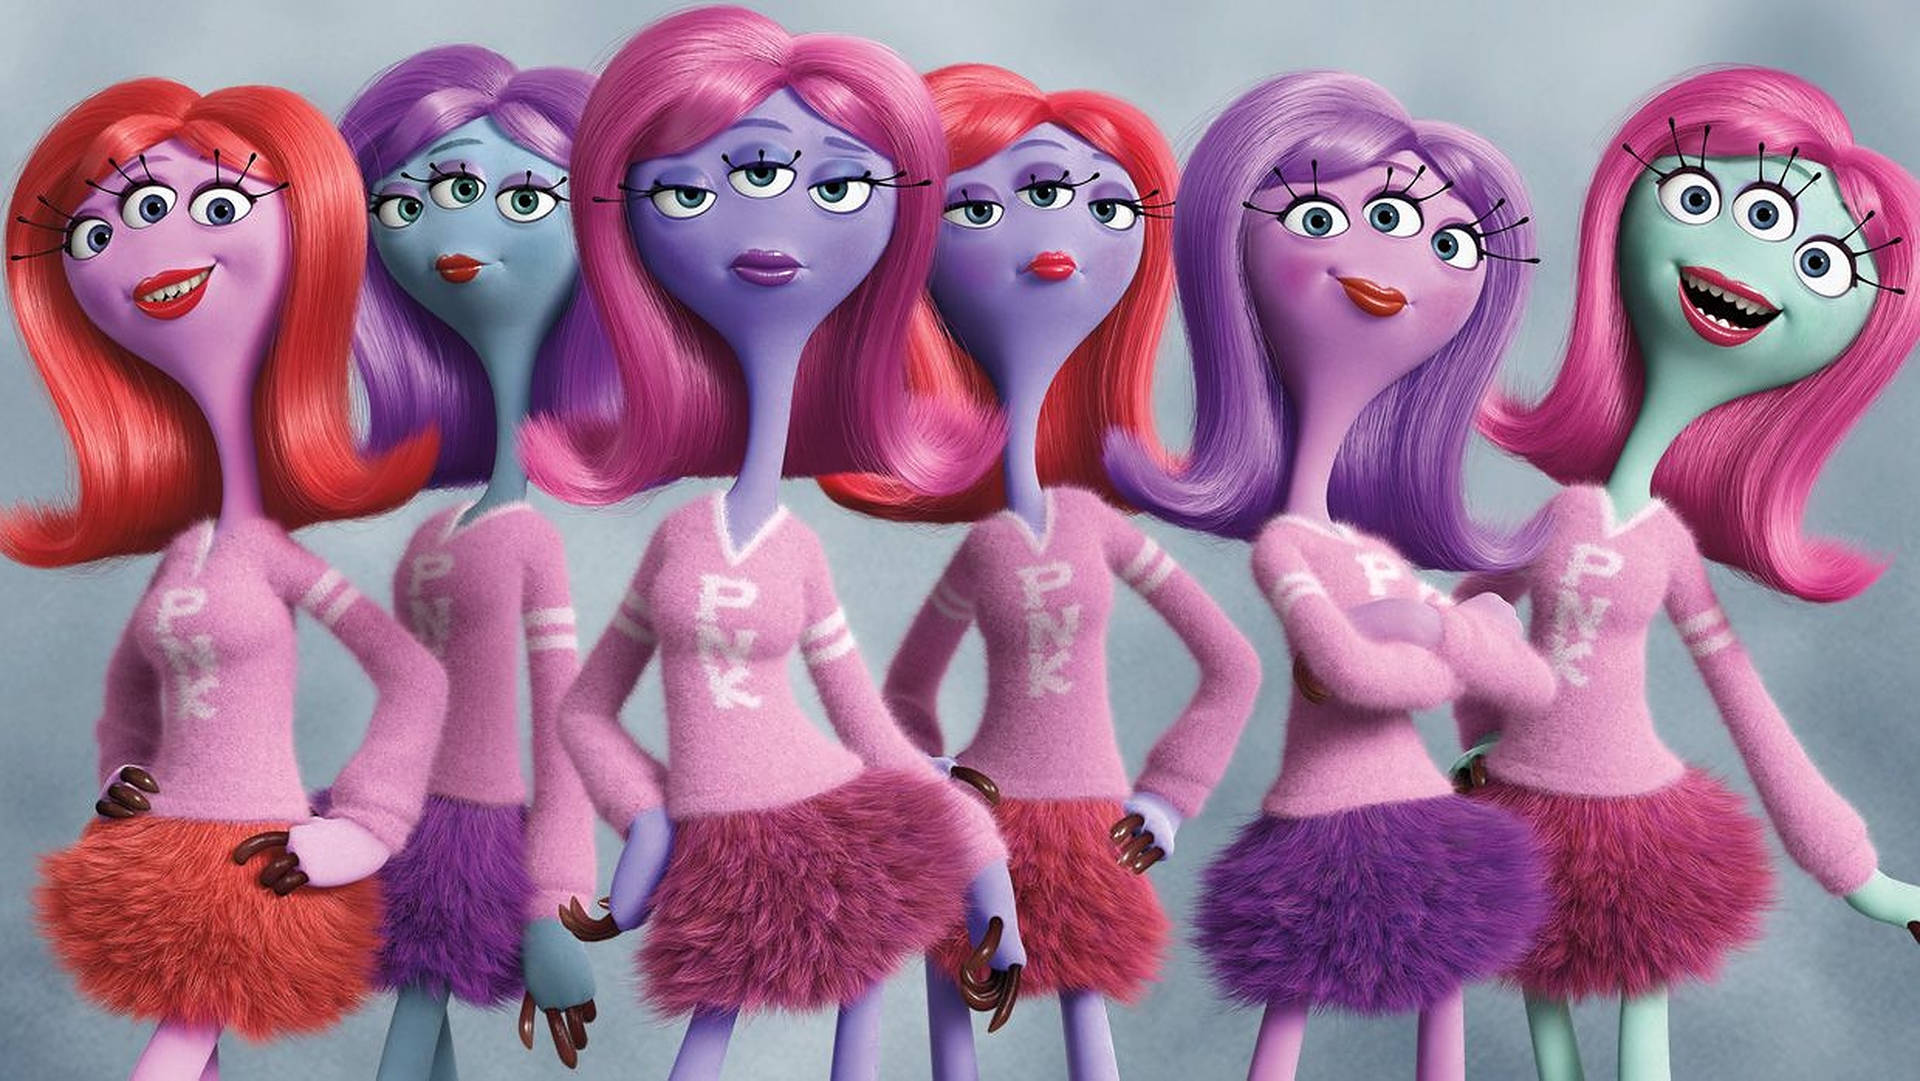 A Group Of Scary Students From Monsters University - Pnk Team Background